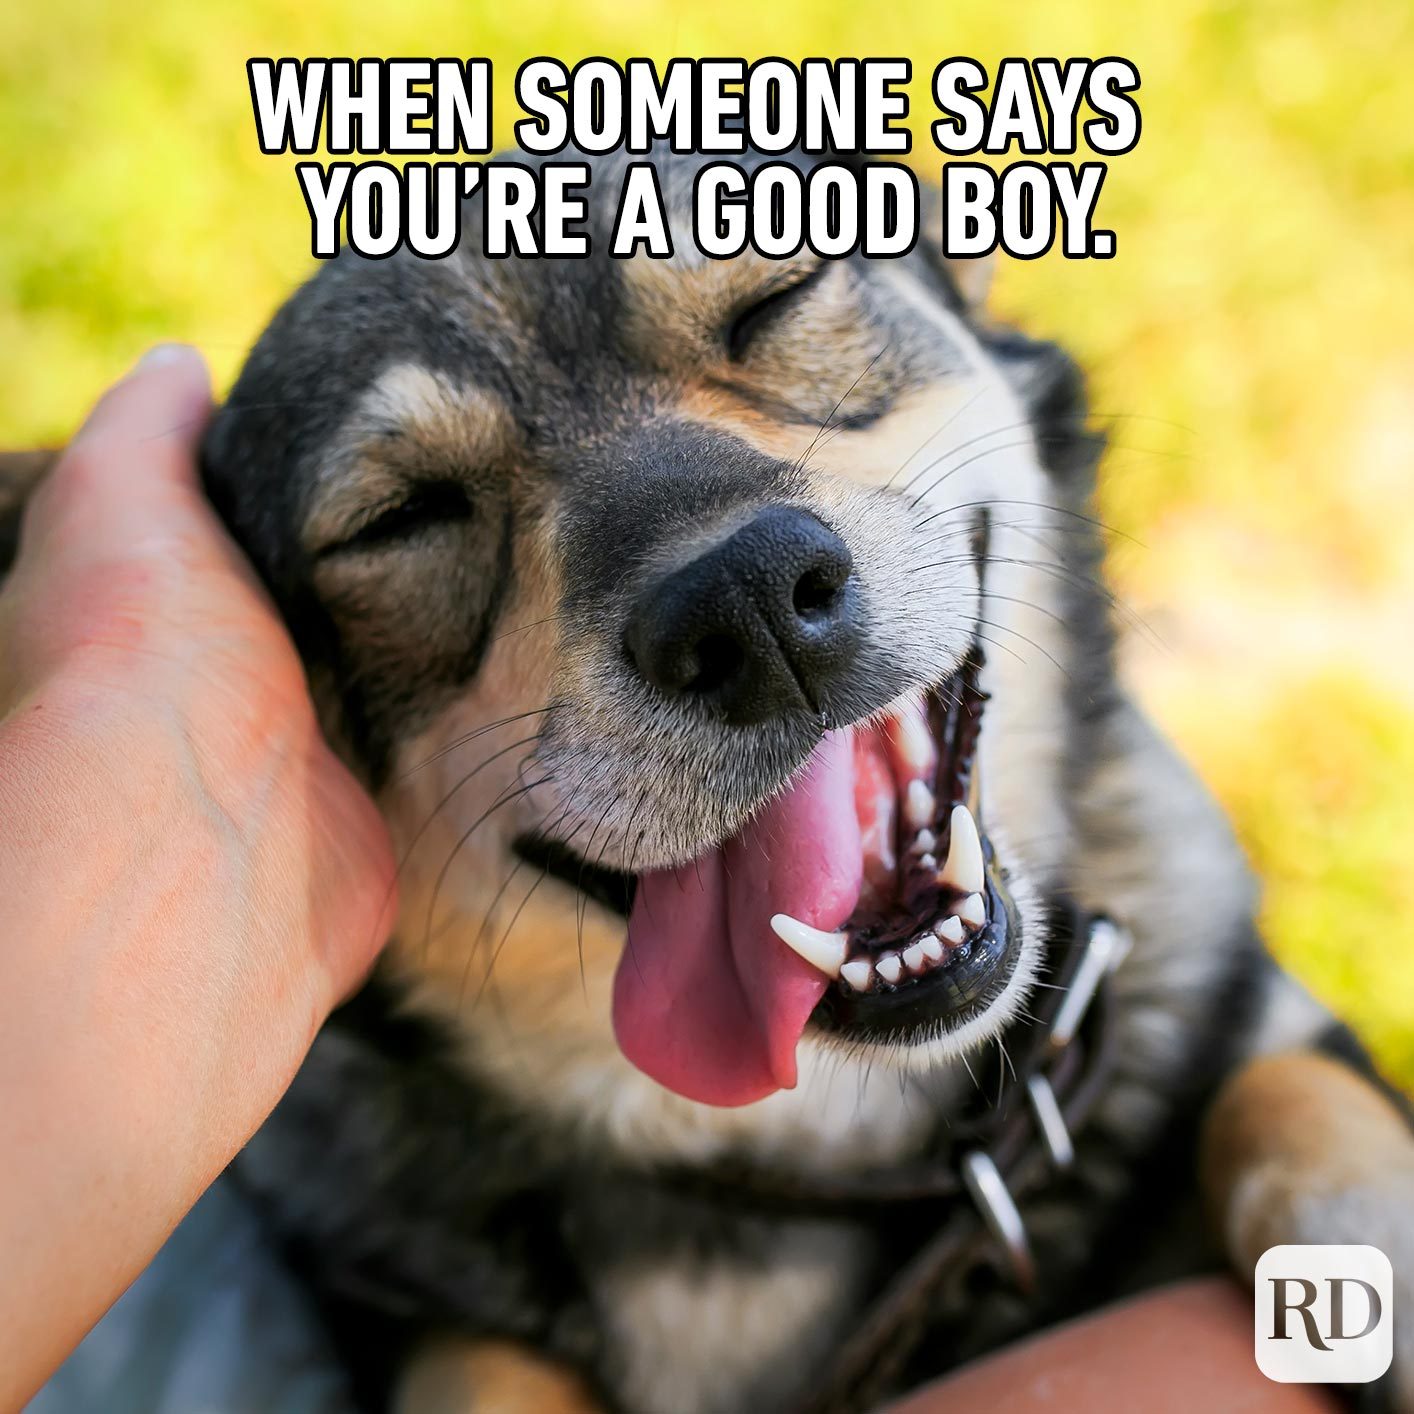 Dog being pet. Meme text: When someone says you're a good boy.